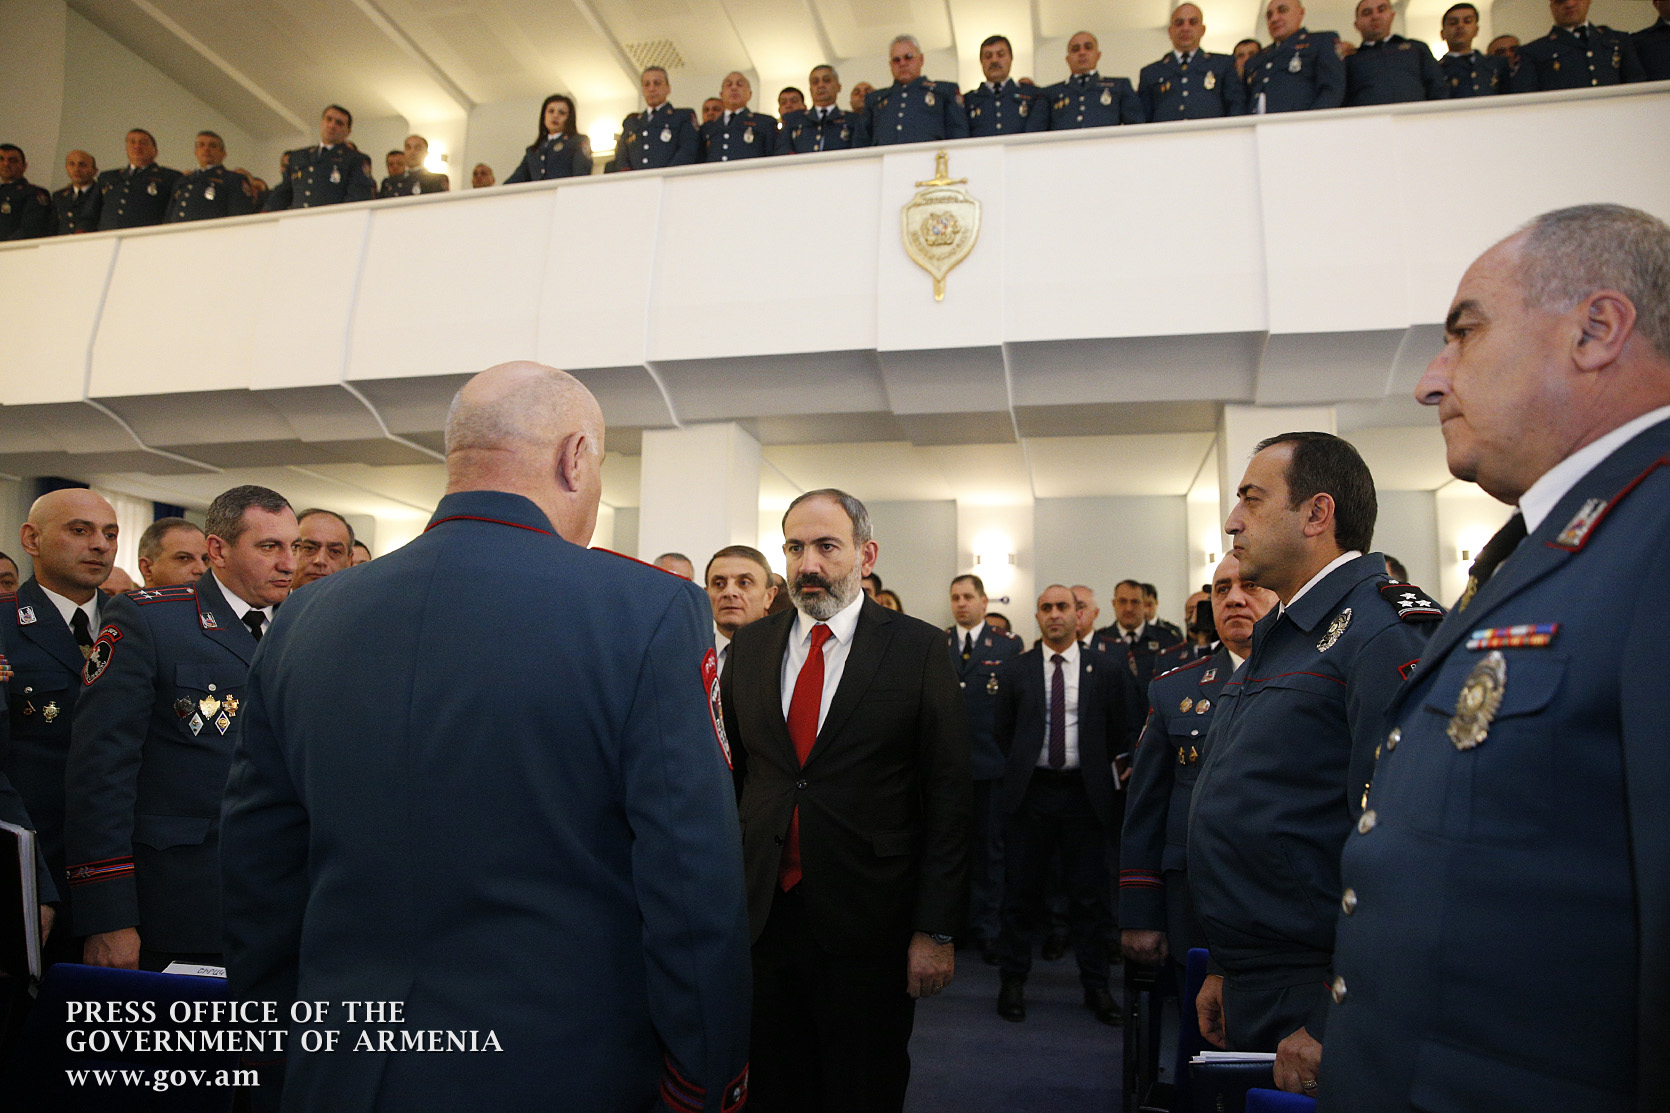 ‘The citizens of Armenia should be sure that the only purpose of the police service is to ensure their rights, security and freedoms’ – PM attends expanded meeting of RA Police Board